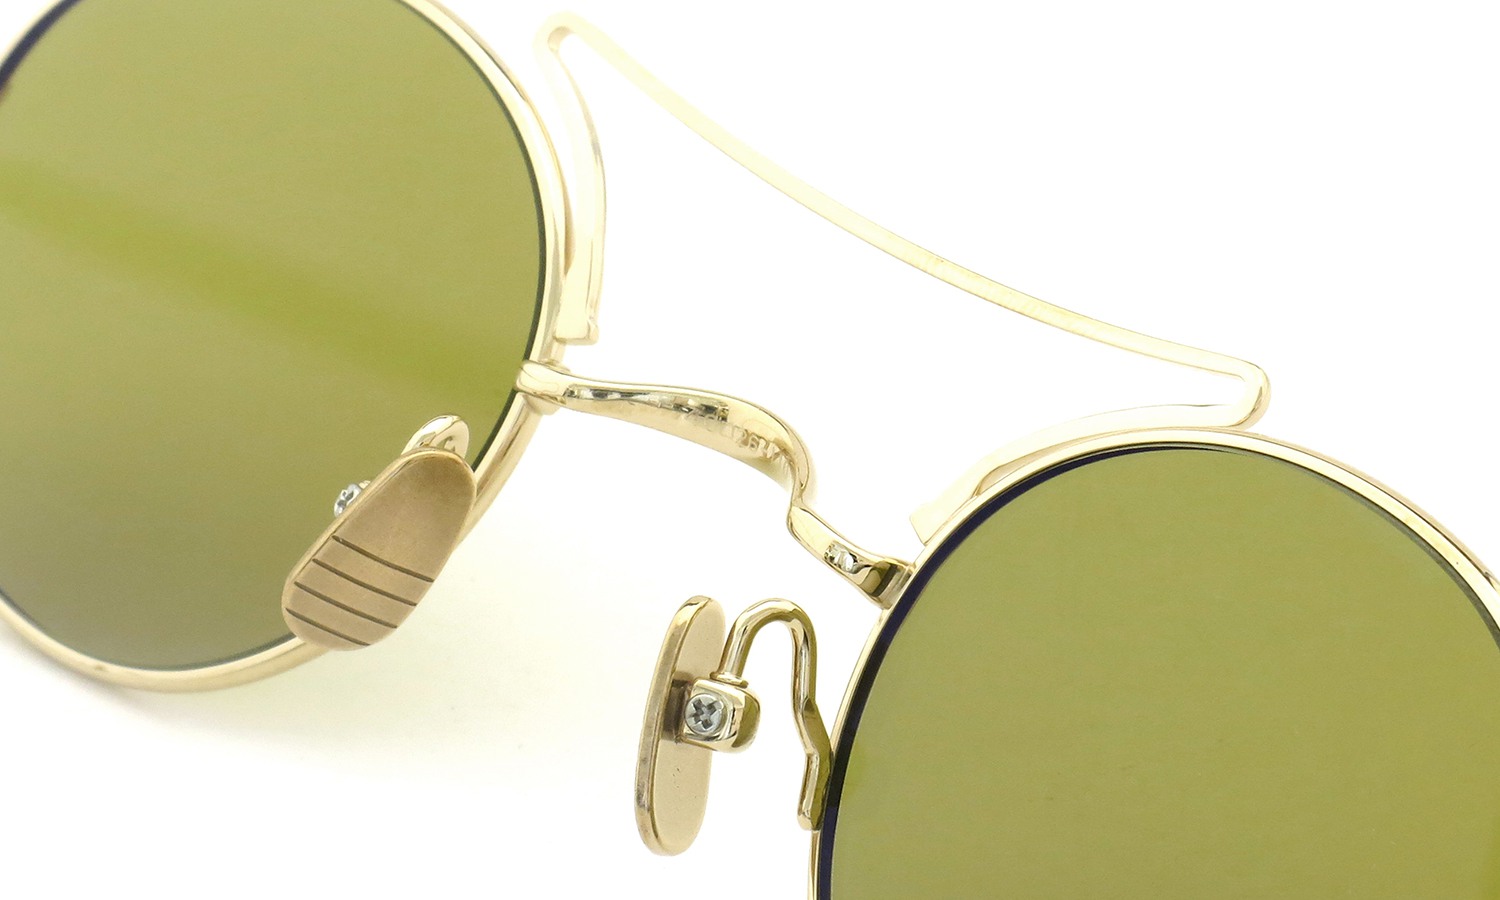 THOM BROWNE Round Sunglasses TB-902-A-GLD GOLD METAL FRAME LIGHT YELLOW SMALL 40 